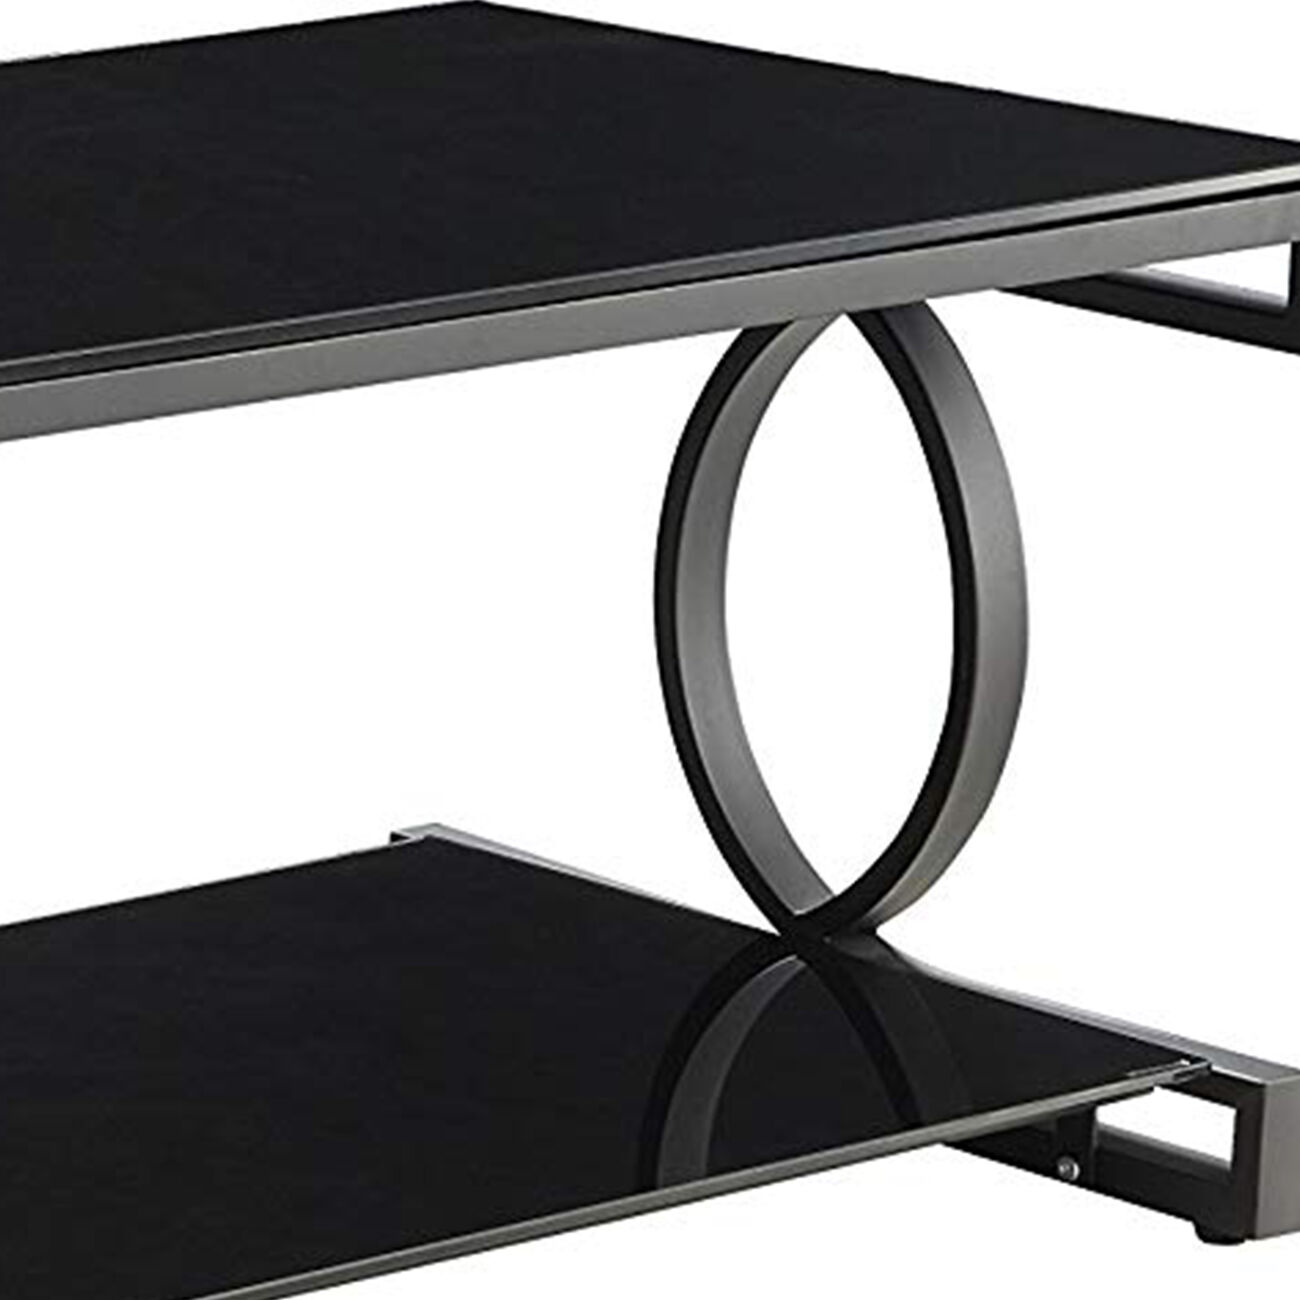 Metal and Glass Coffee Table Set with Two End Tables, Black